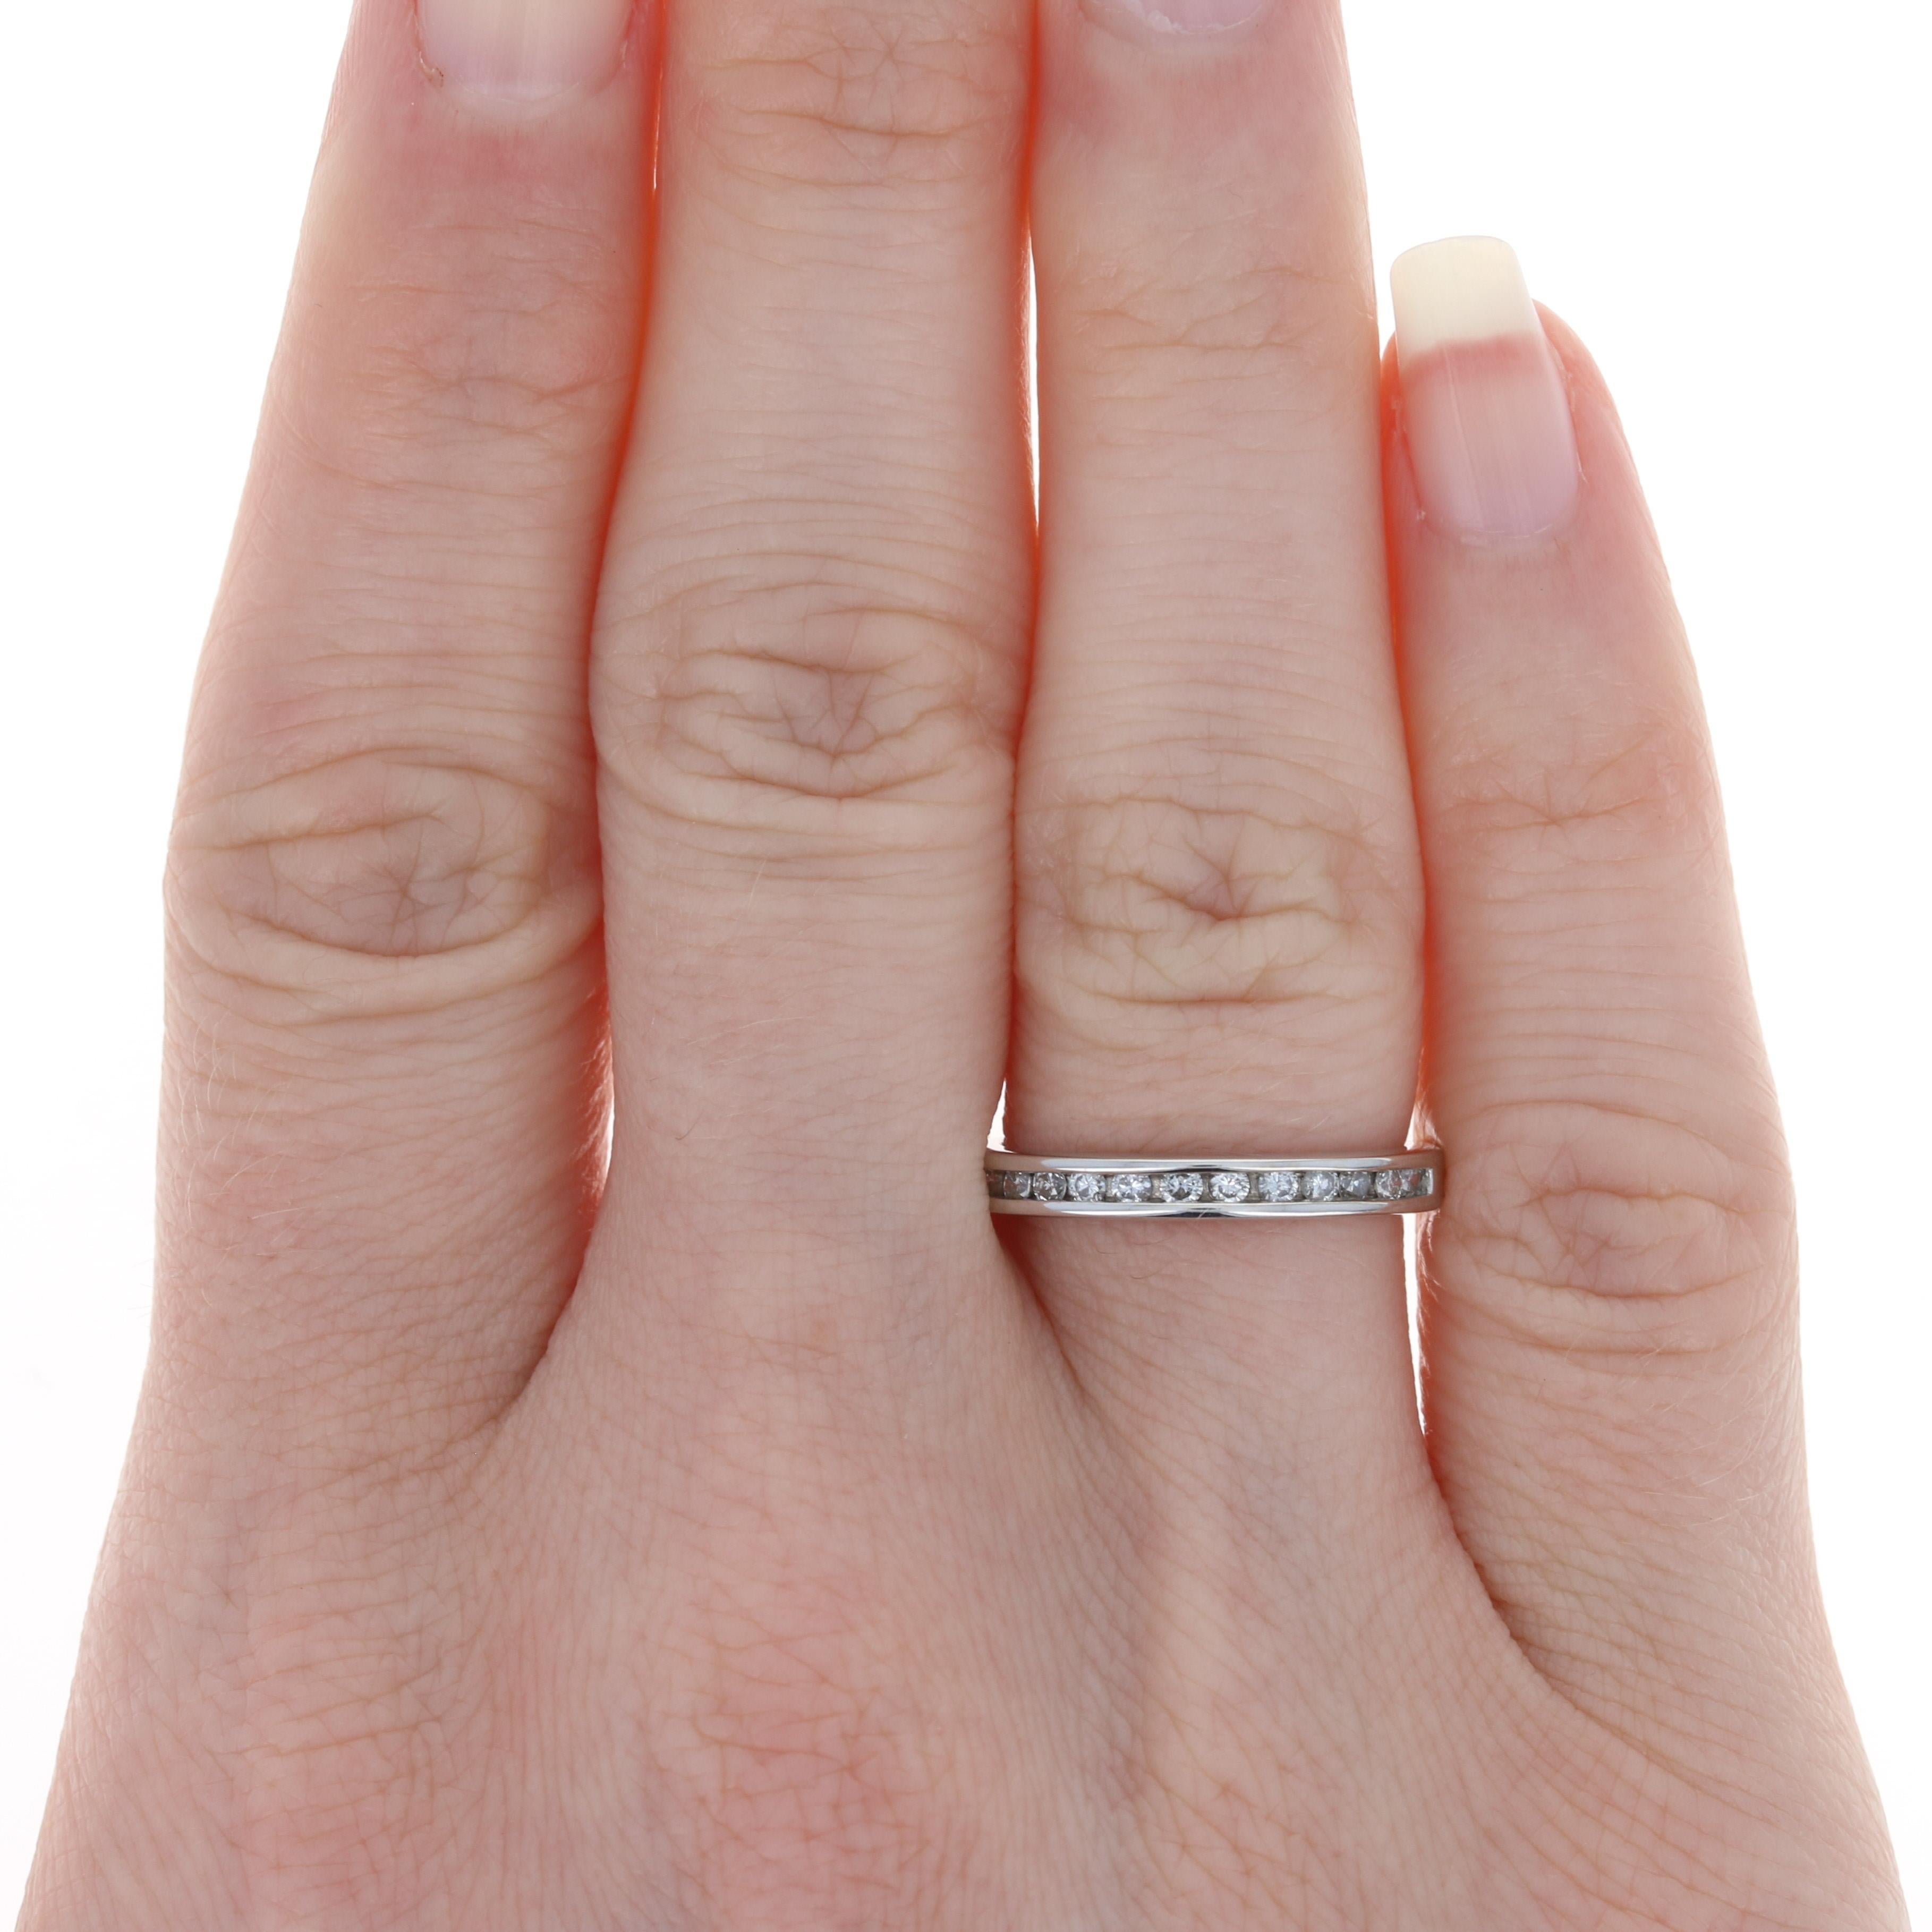 This ring is a size 5 3/4 - 6, but it can be re-sized up 1 size for a $30 fee. Once a ring is re-sized, we guarantee the work but we are unable to offer a refund on the sizing. Please contact for additional sizing options.
 
 Metal Content: